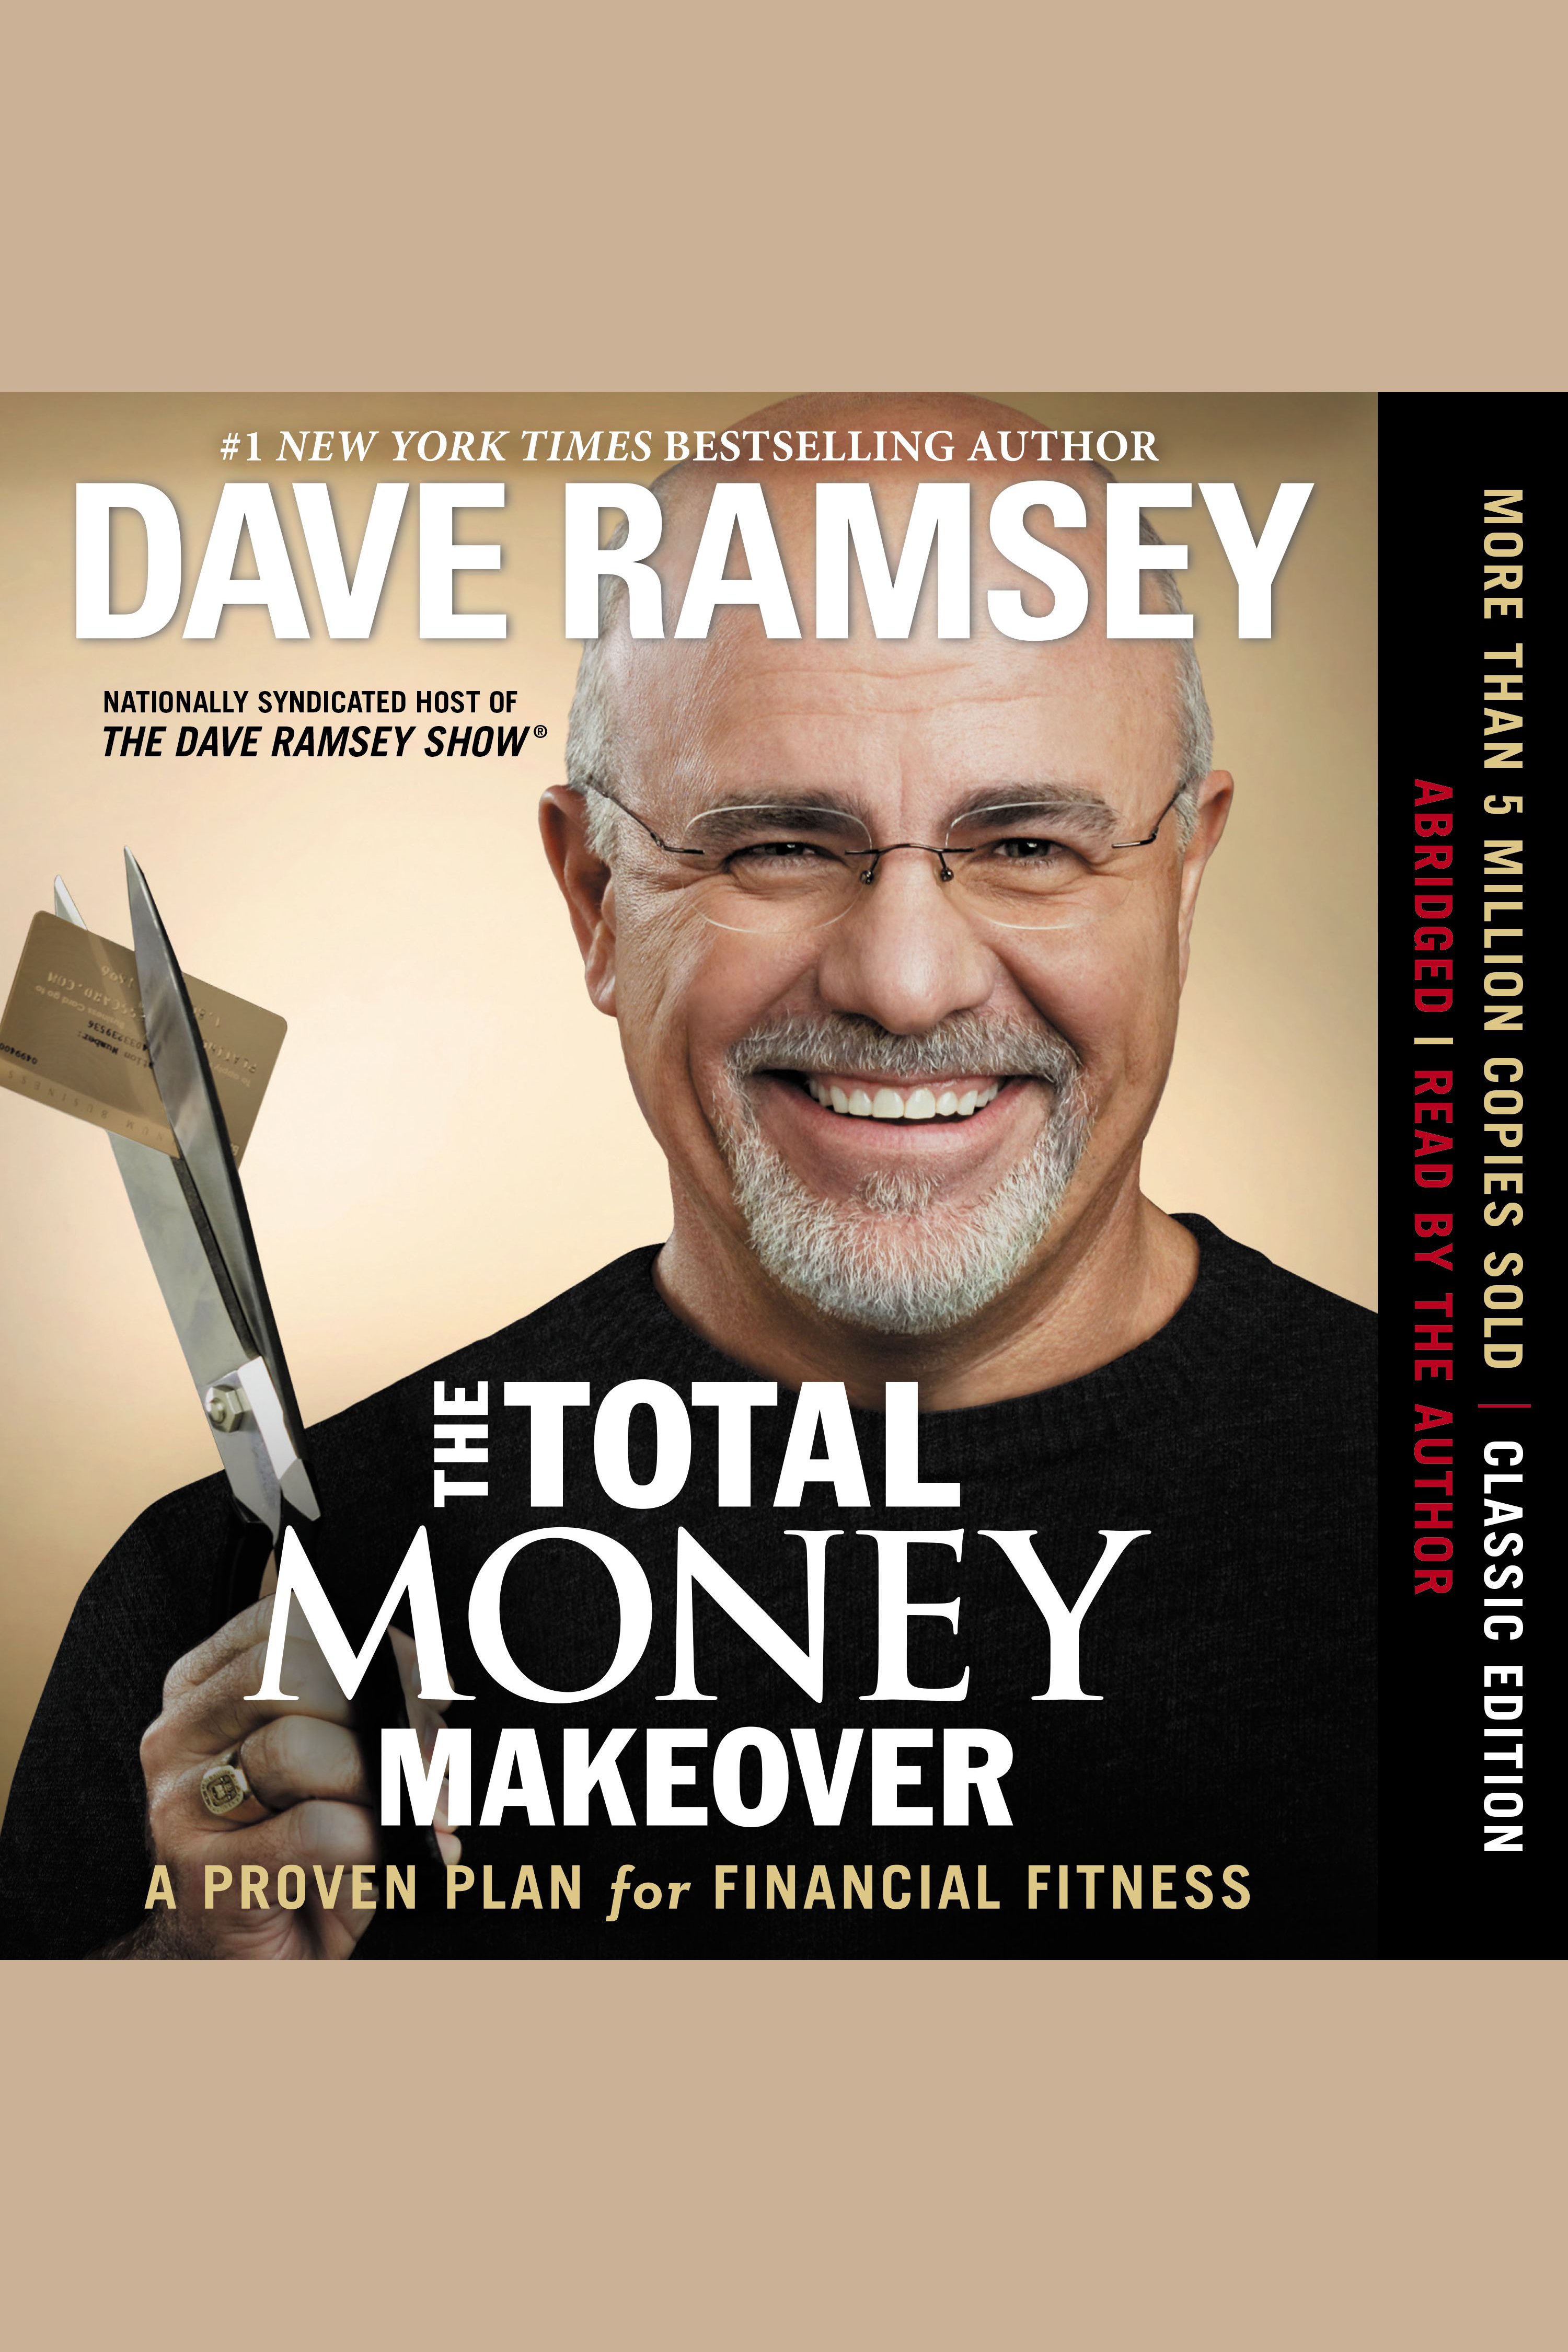 The total money makeover a proven plan for financial fitness cover image